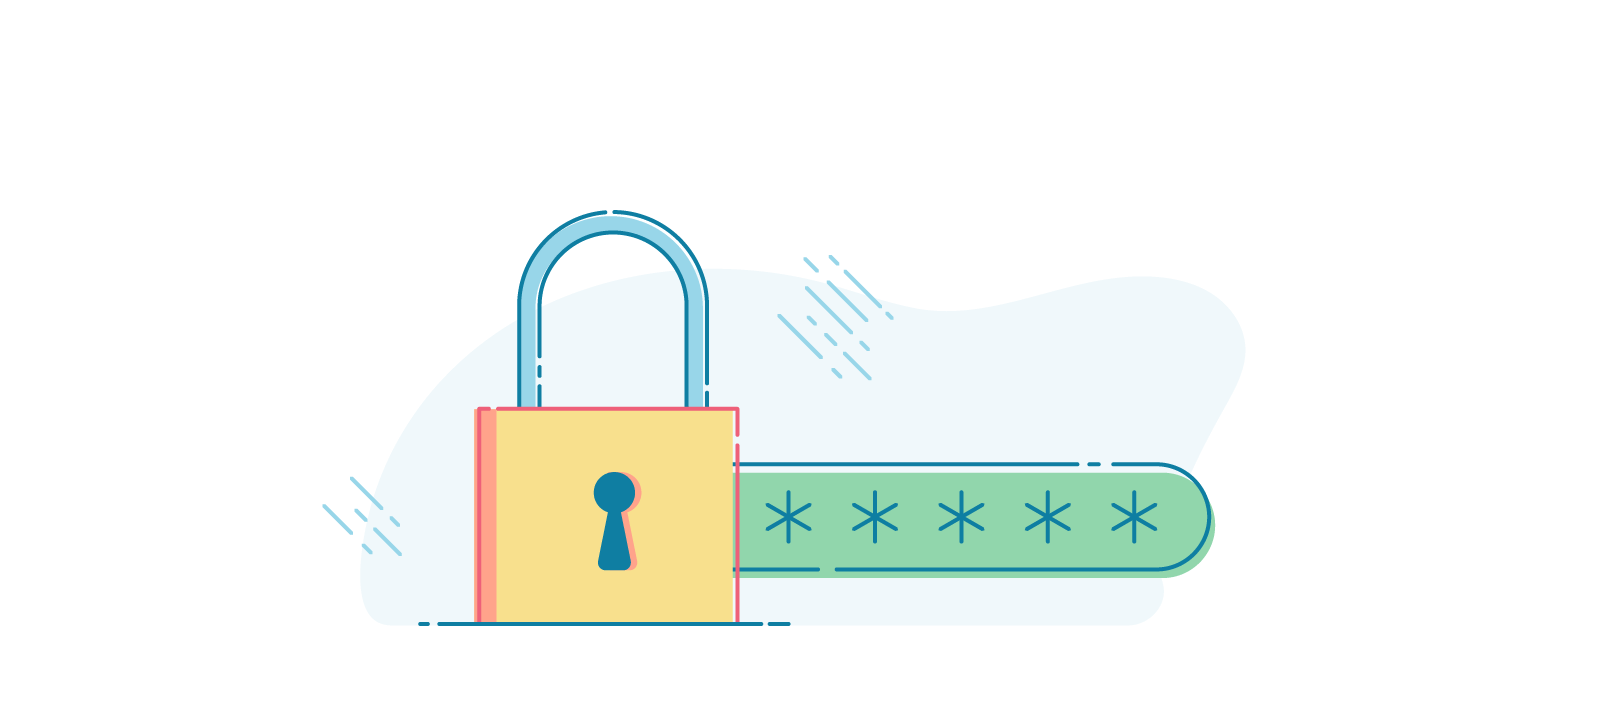 Illustration of a padlock in-front of a password input.